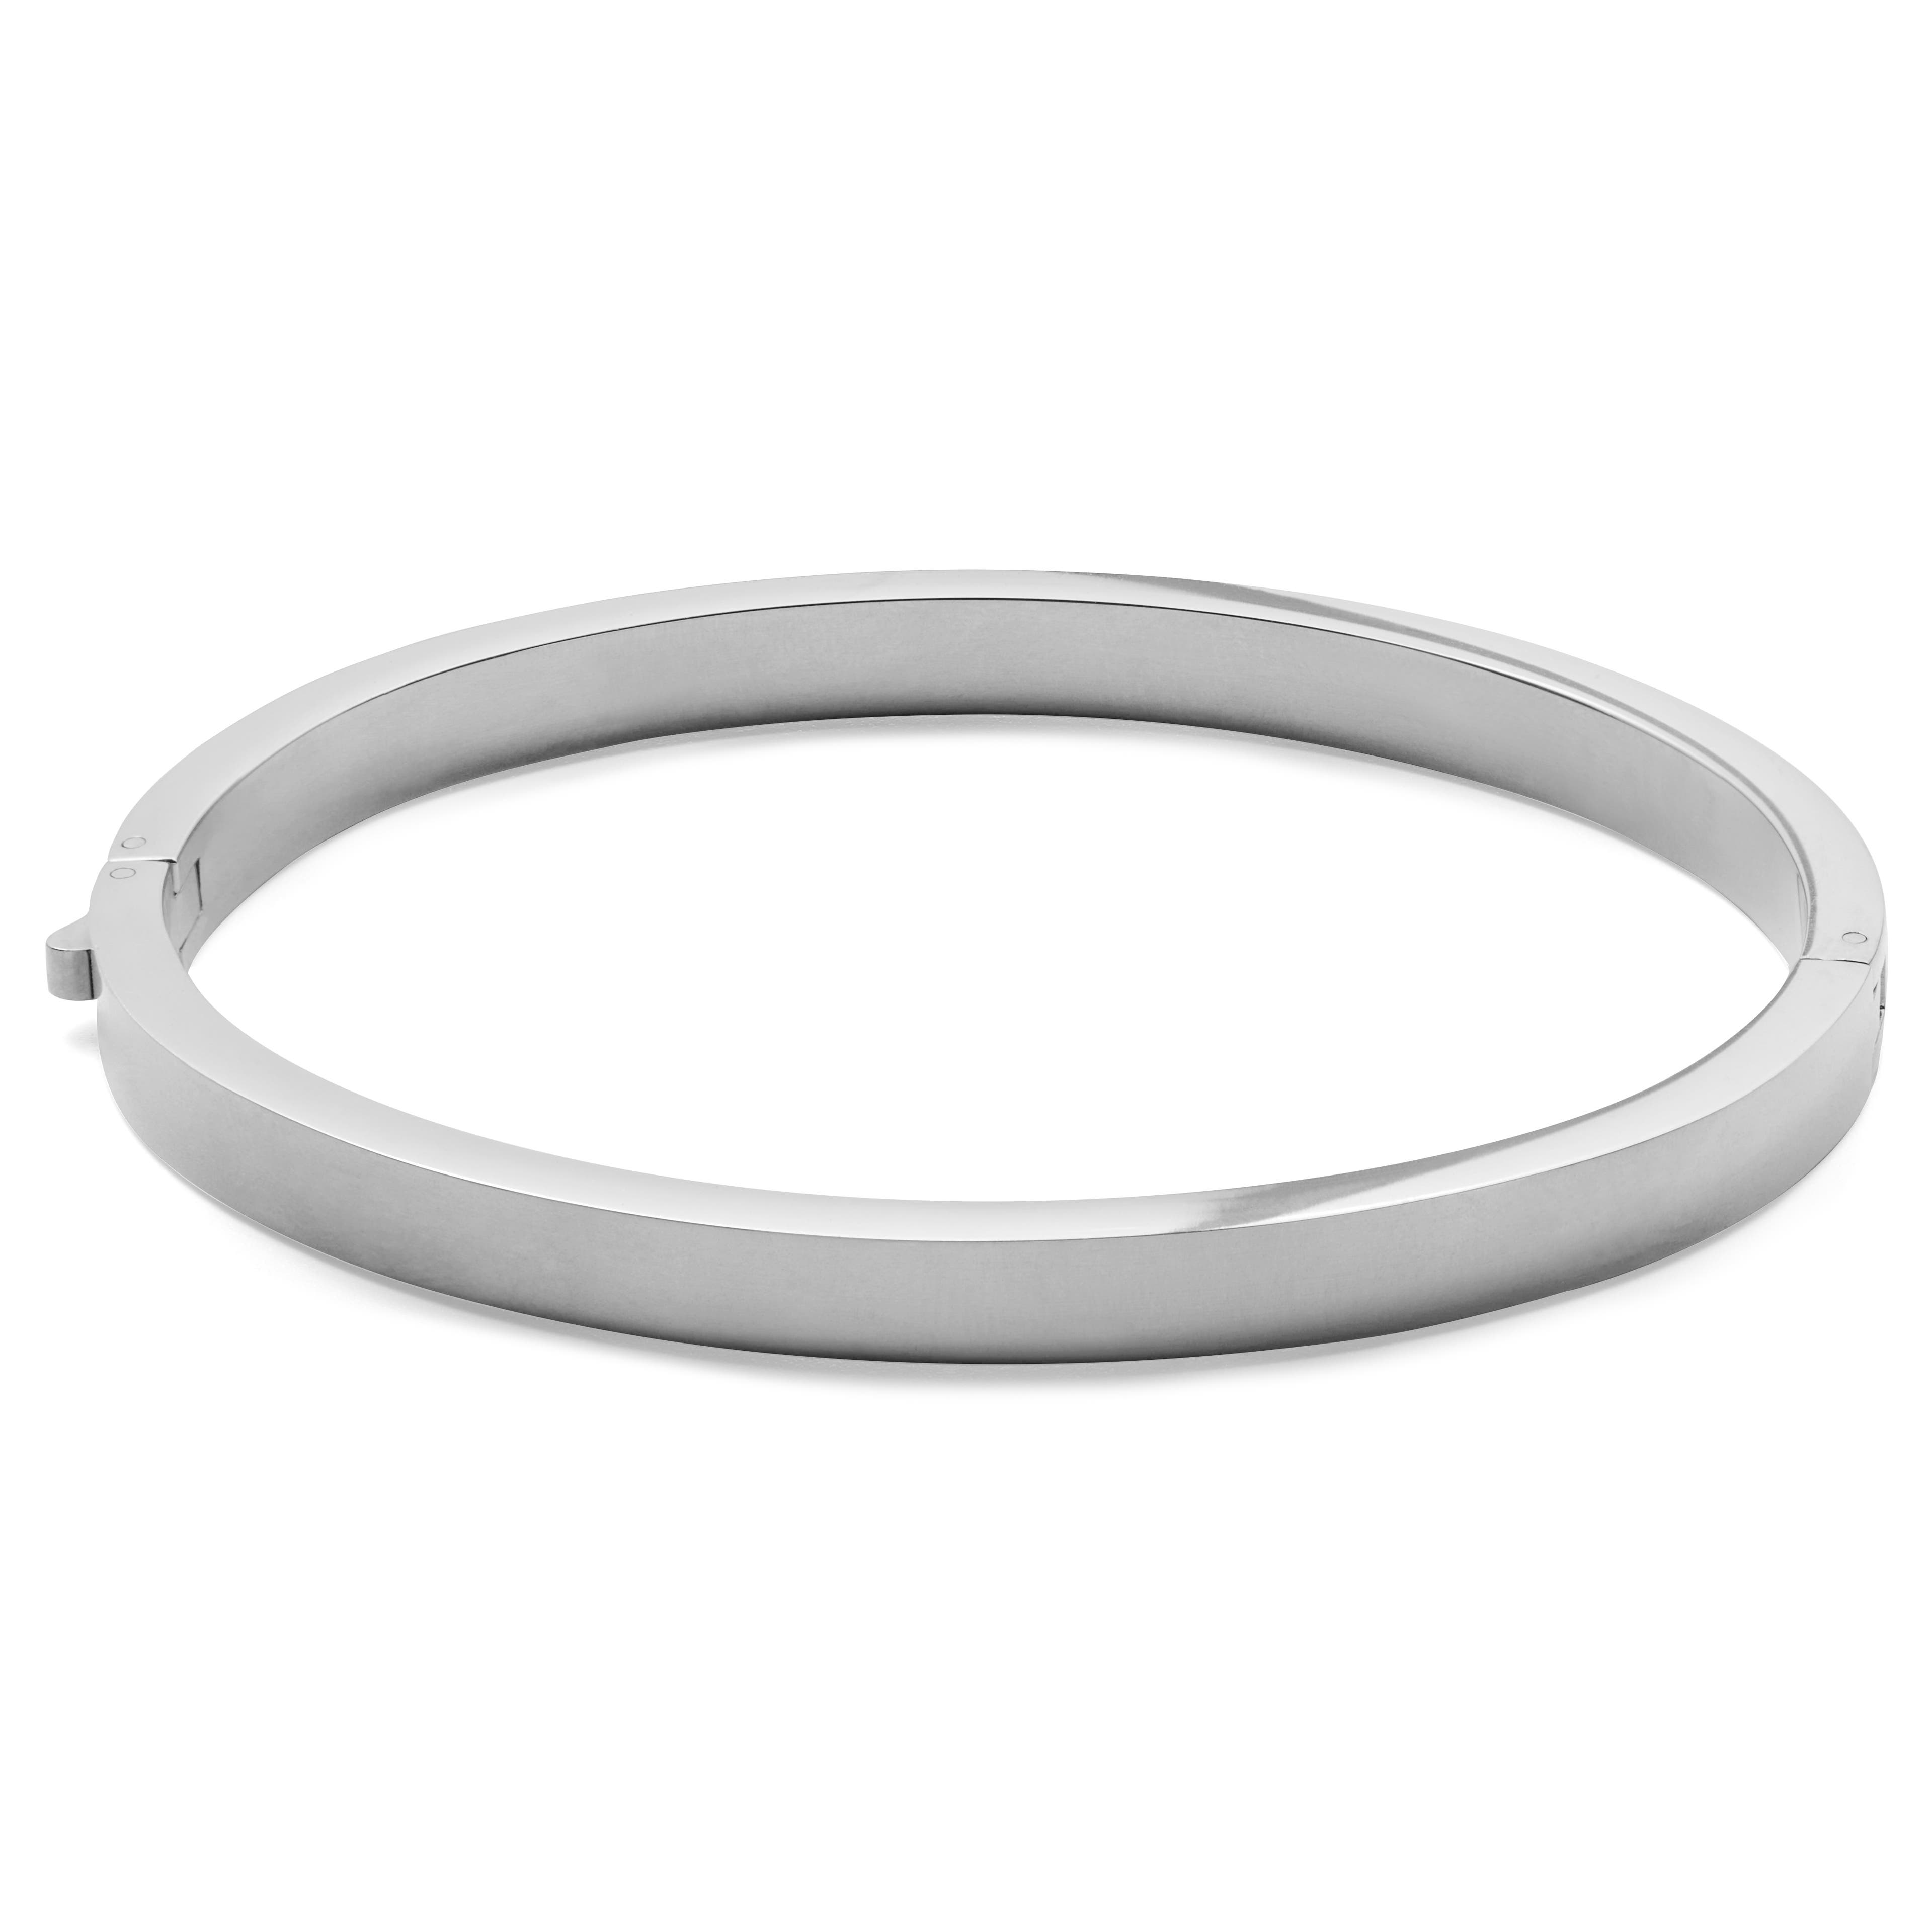 Arie | Polished Silver-Tone Stainless Steel Bangle Bracelet